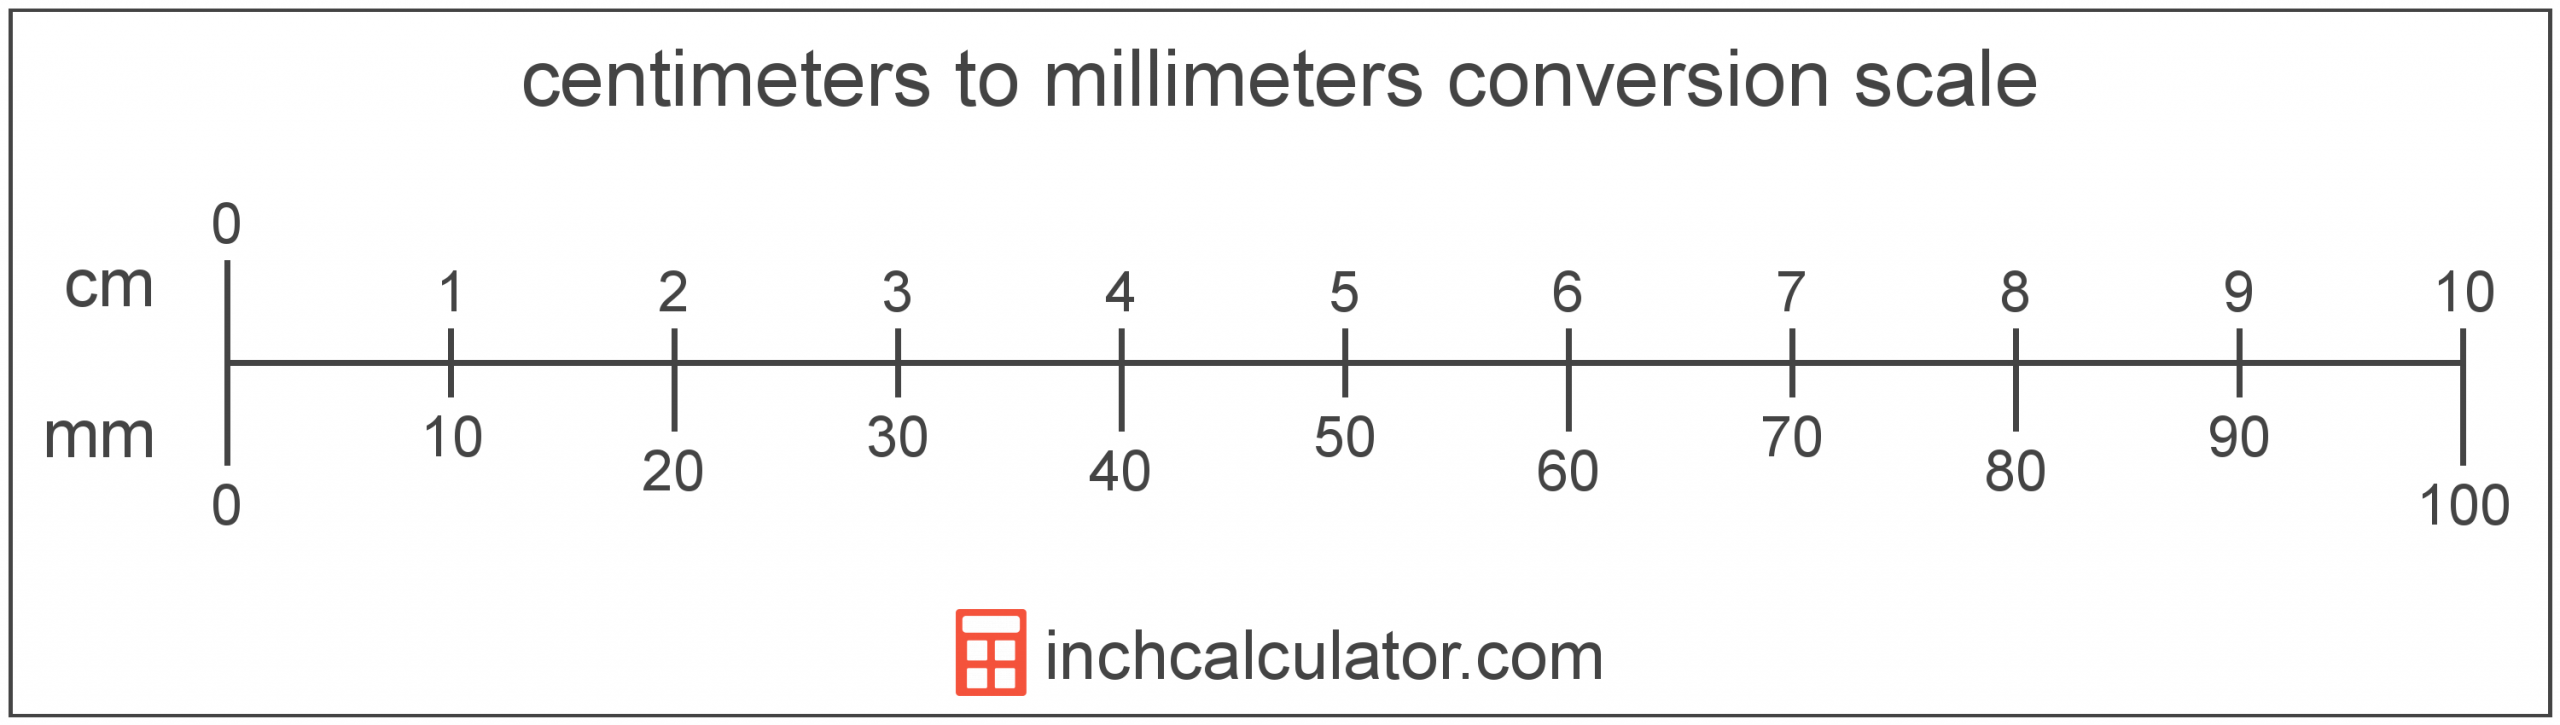 Centimeters To Millimeters Conversion (Cm To Mm)